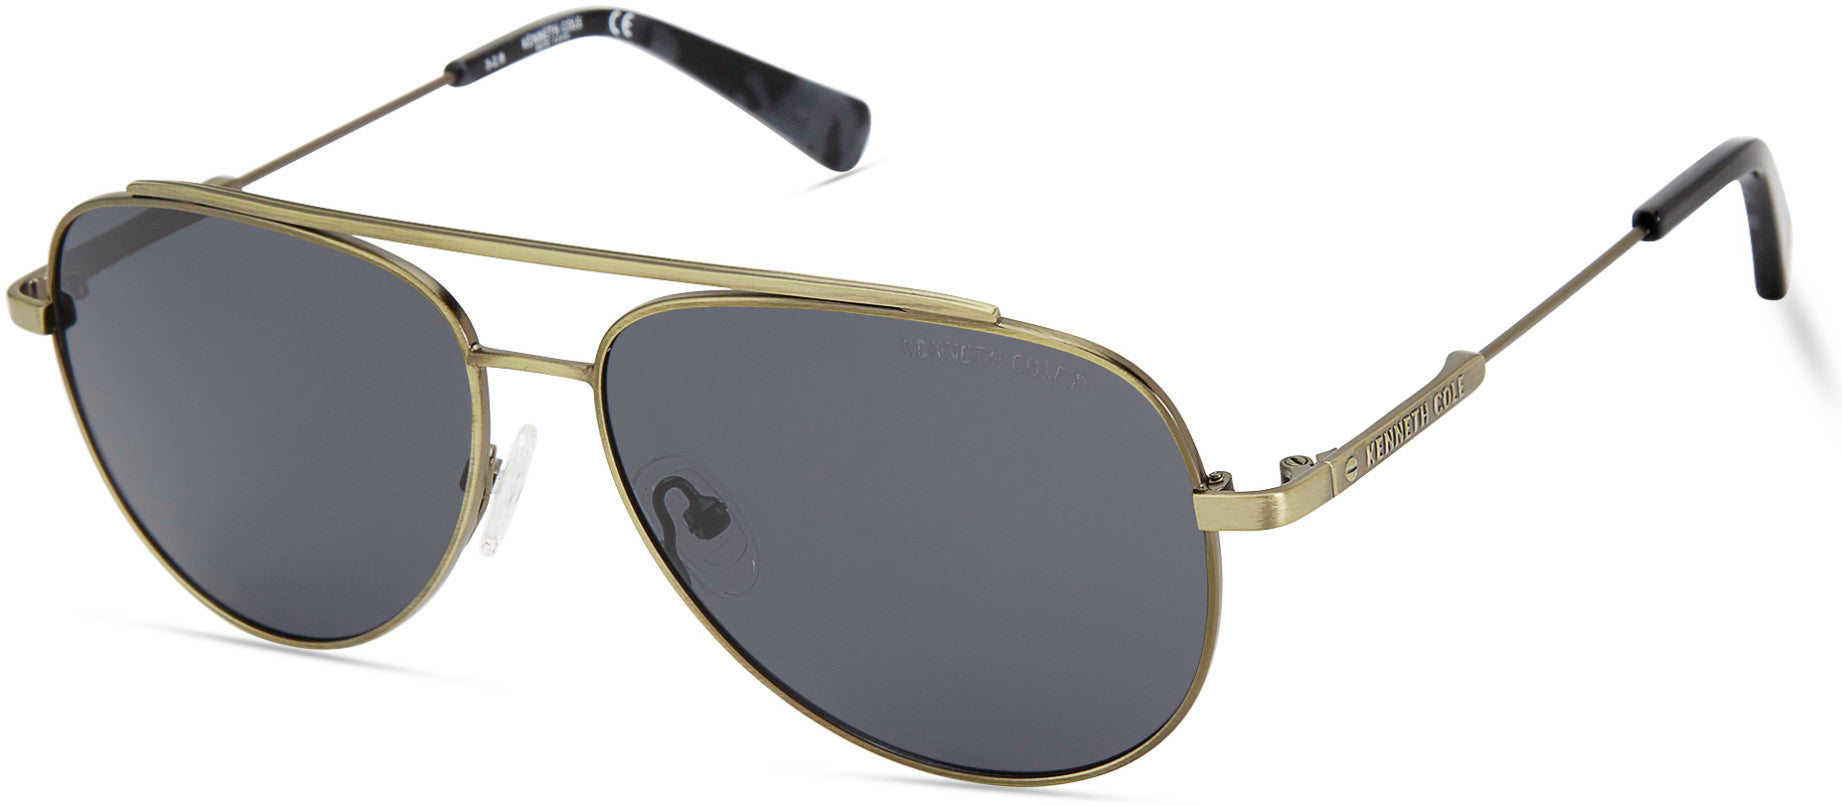 Kenneth Cole New York,Kenneth Cole Reaction KC7233 Geometric Sunglasses 92D-92D - Blue/other / Smoke Polarized Lenses